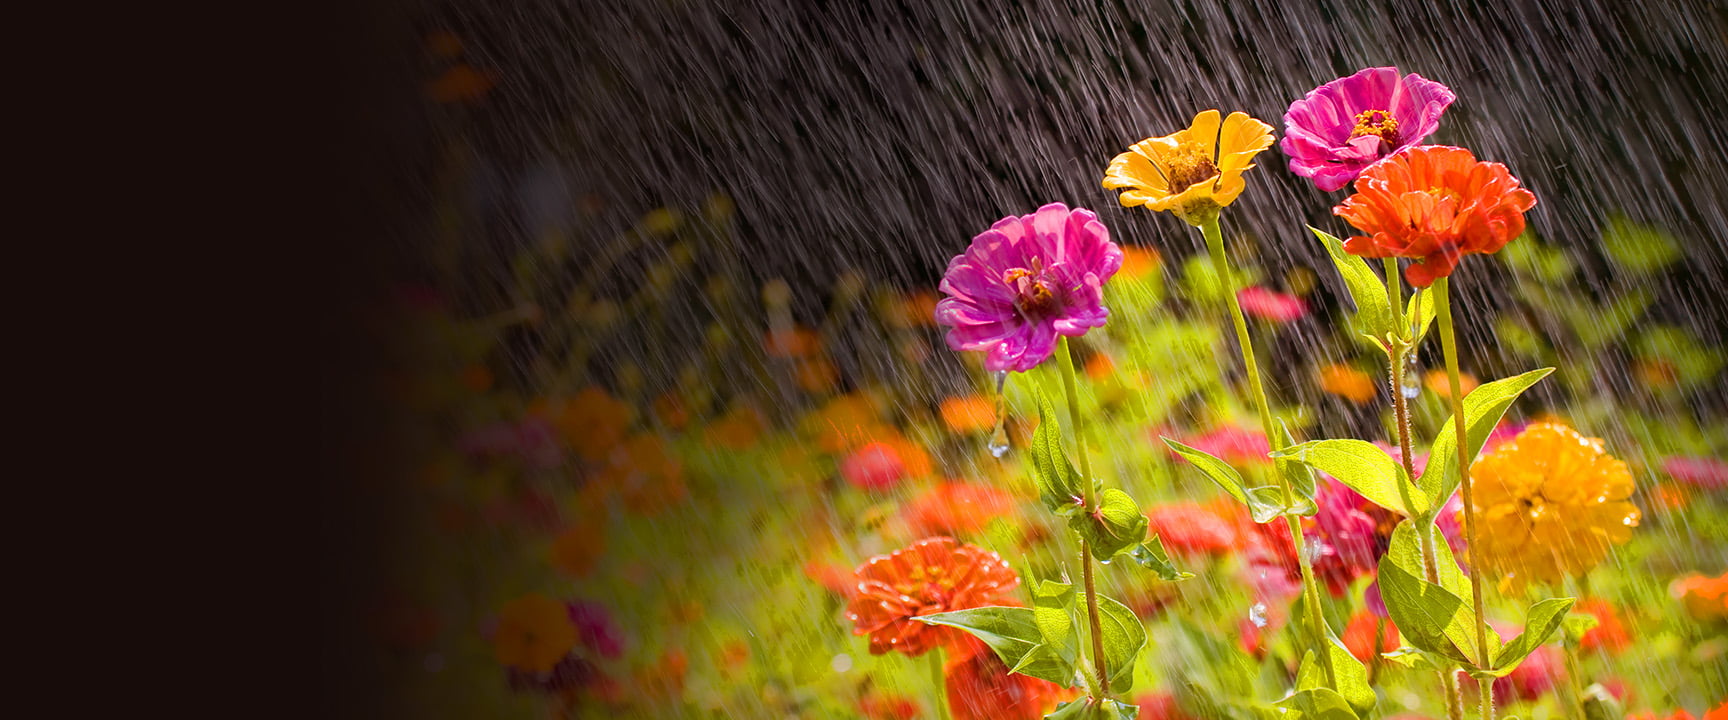 Colorful flowers in the rain